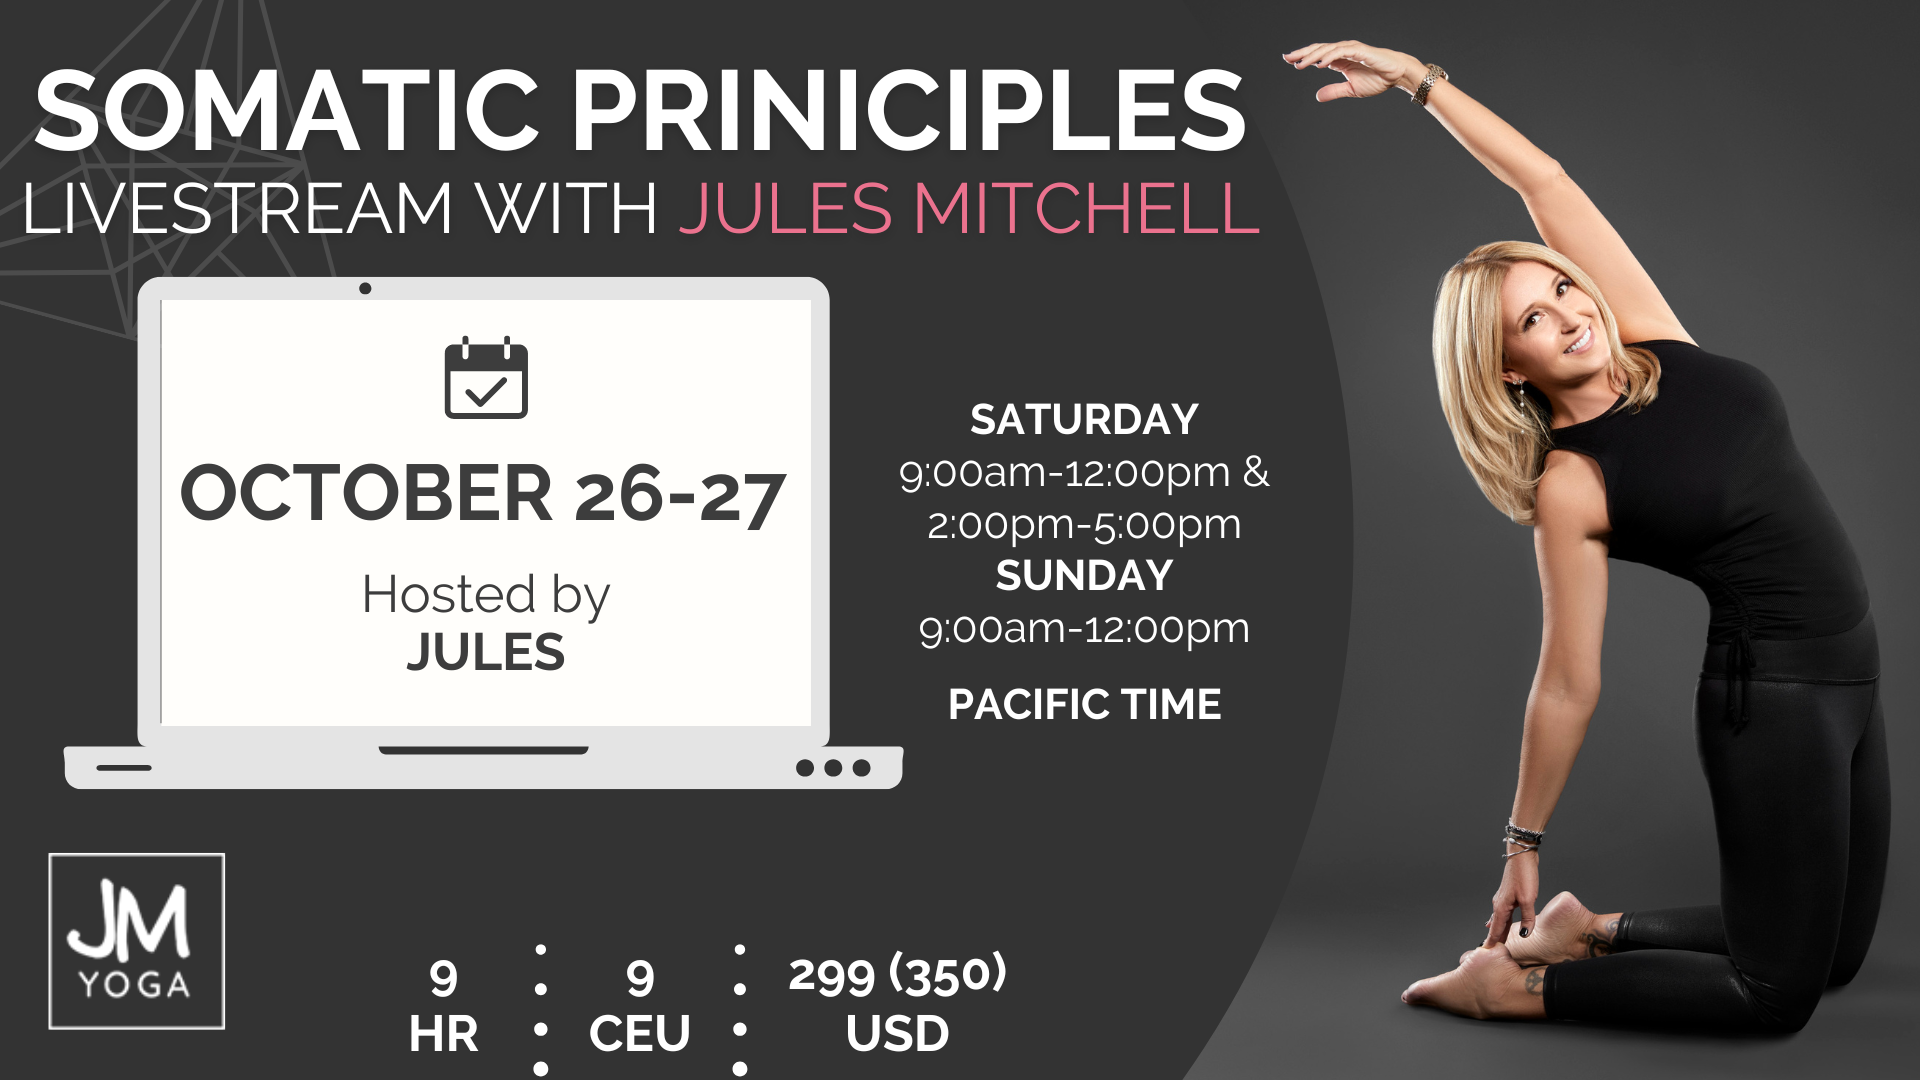 Jules Mitchell offers an online workshop for yoga teacher on somatics and motor control theory, motor learning, and development.